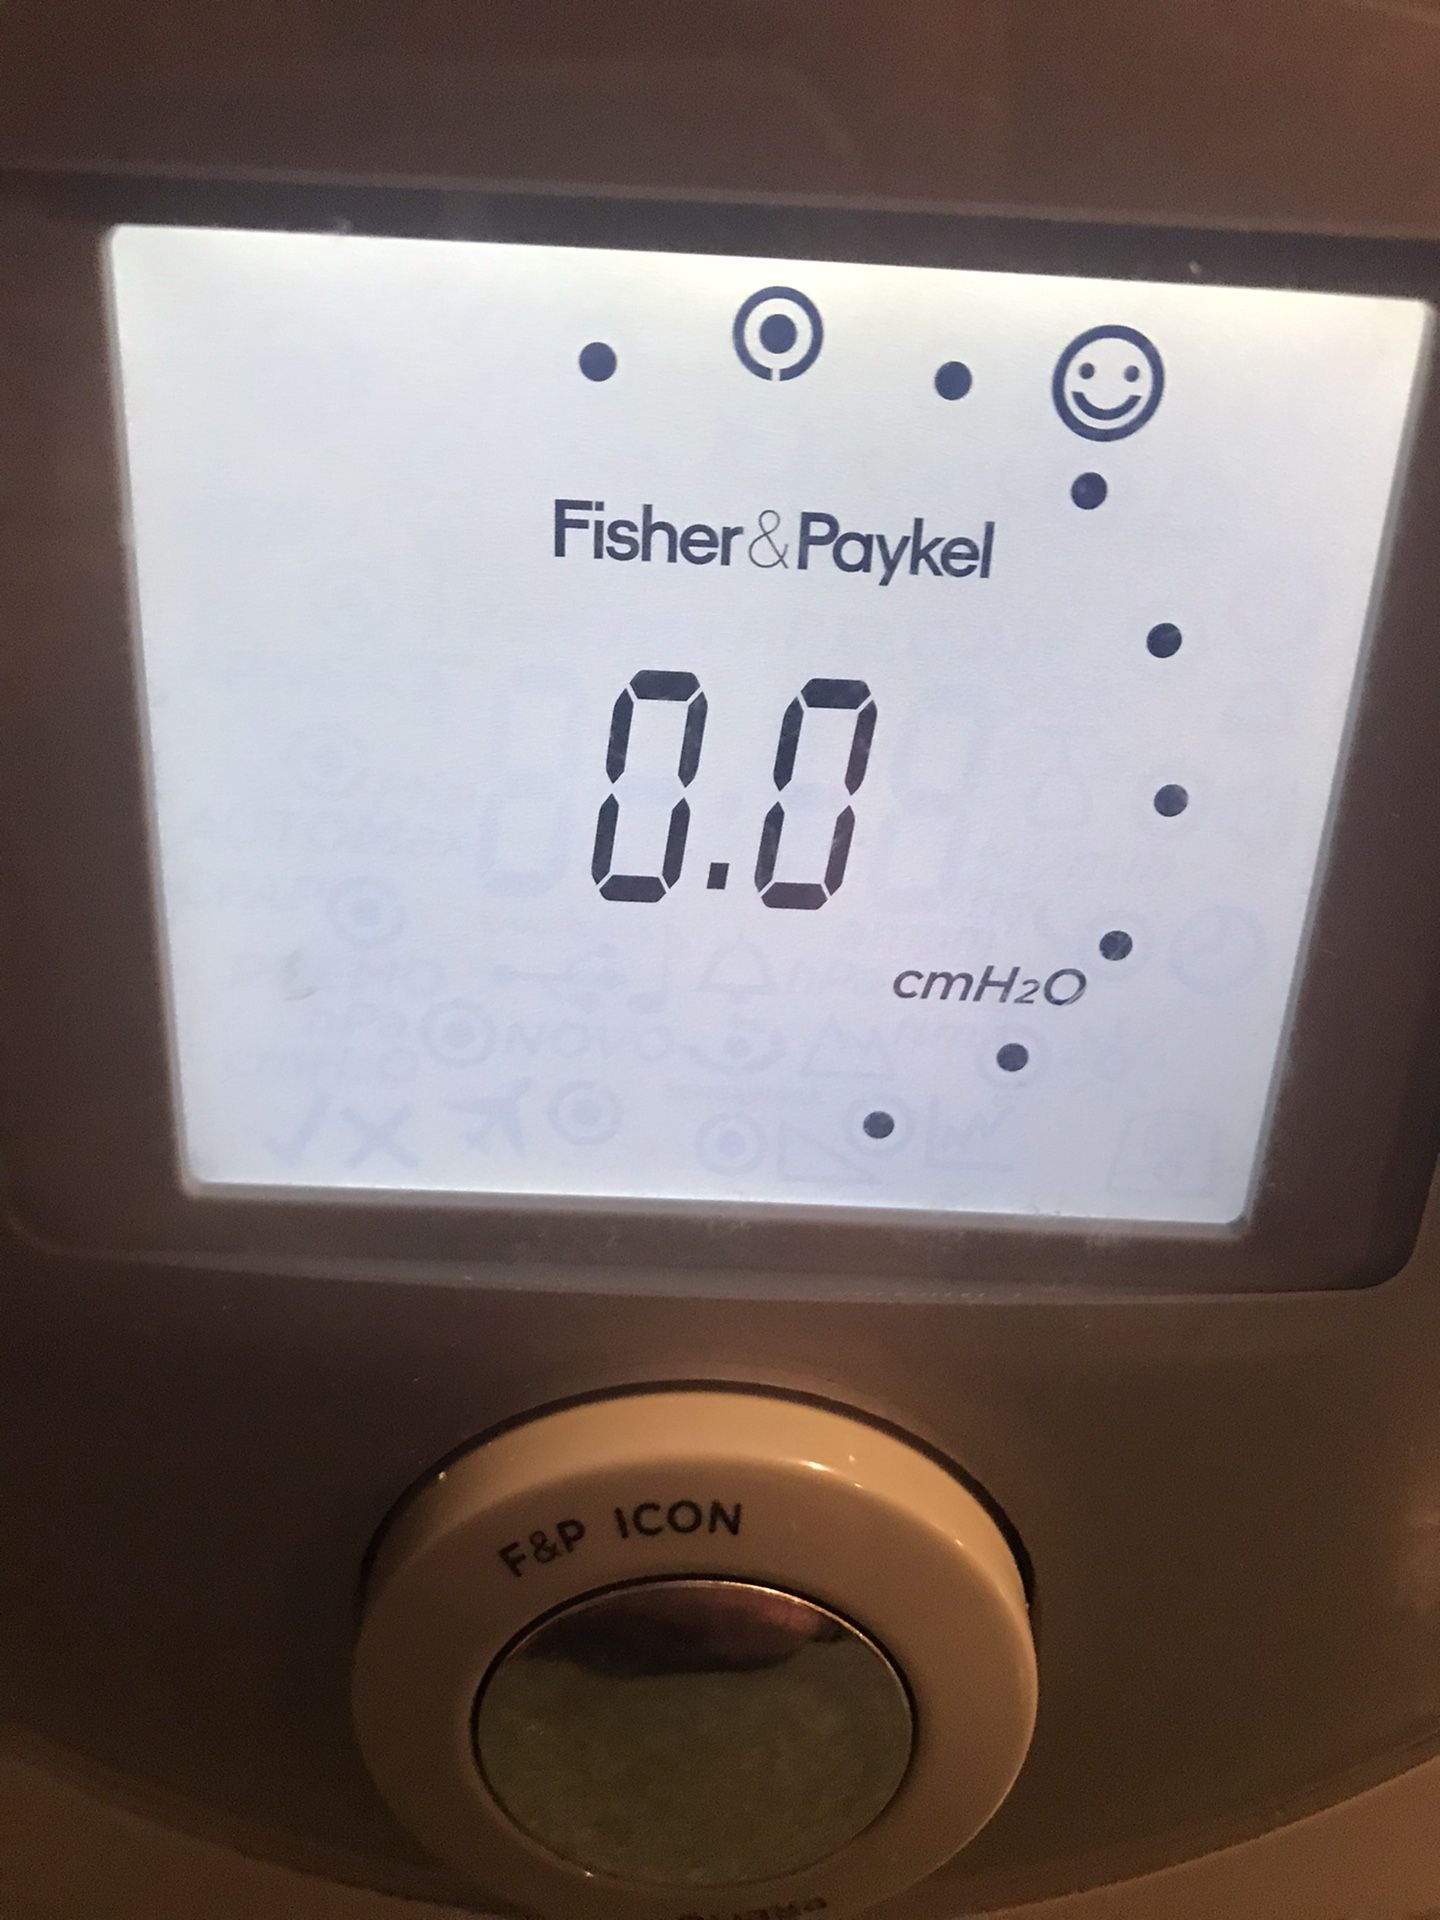 CPAP Machine - Fisher & Paykel ICON